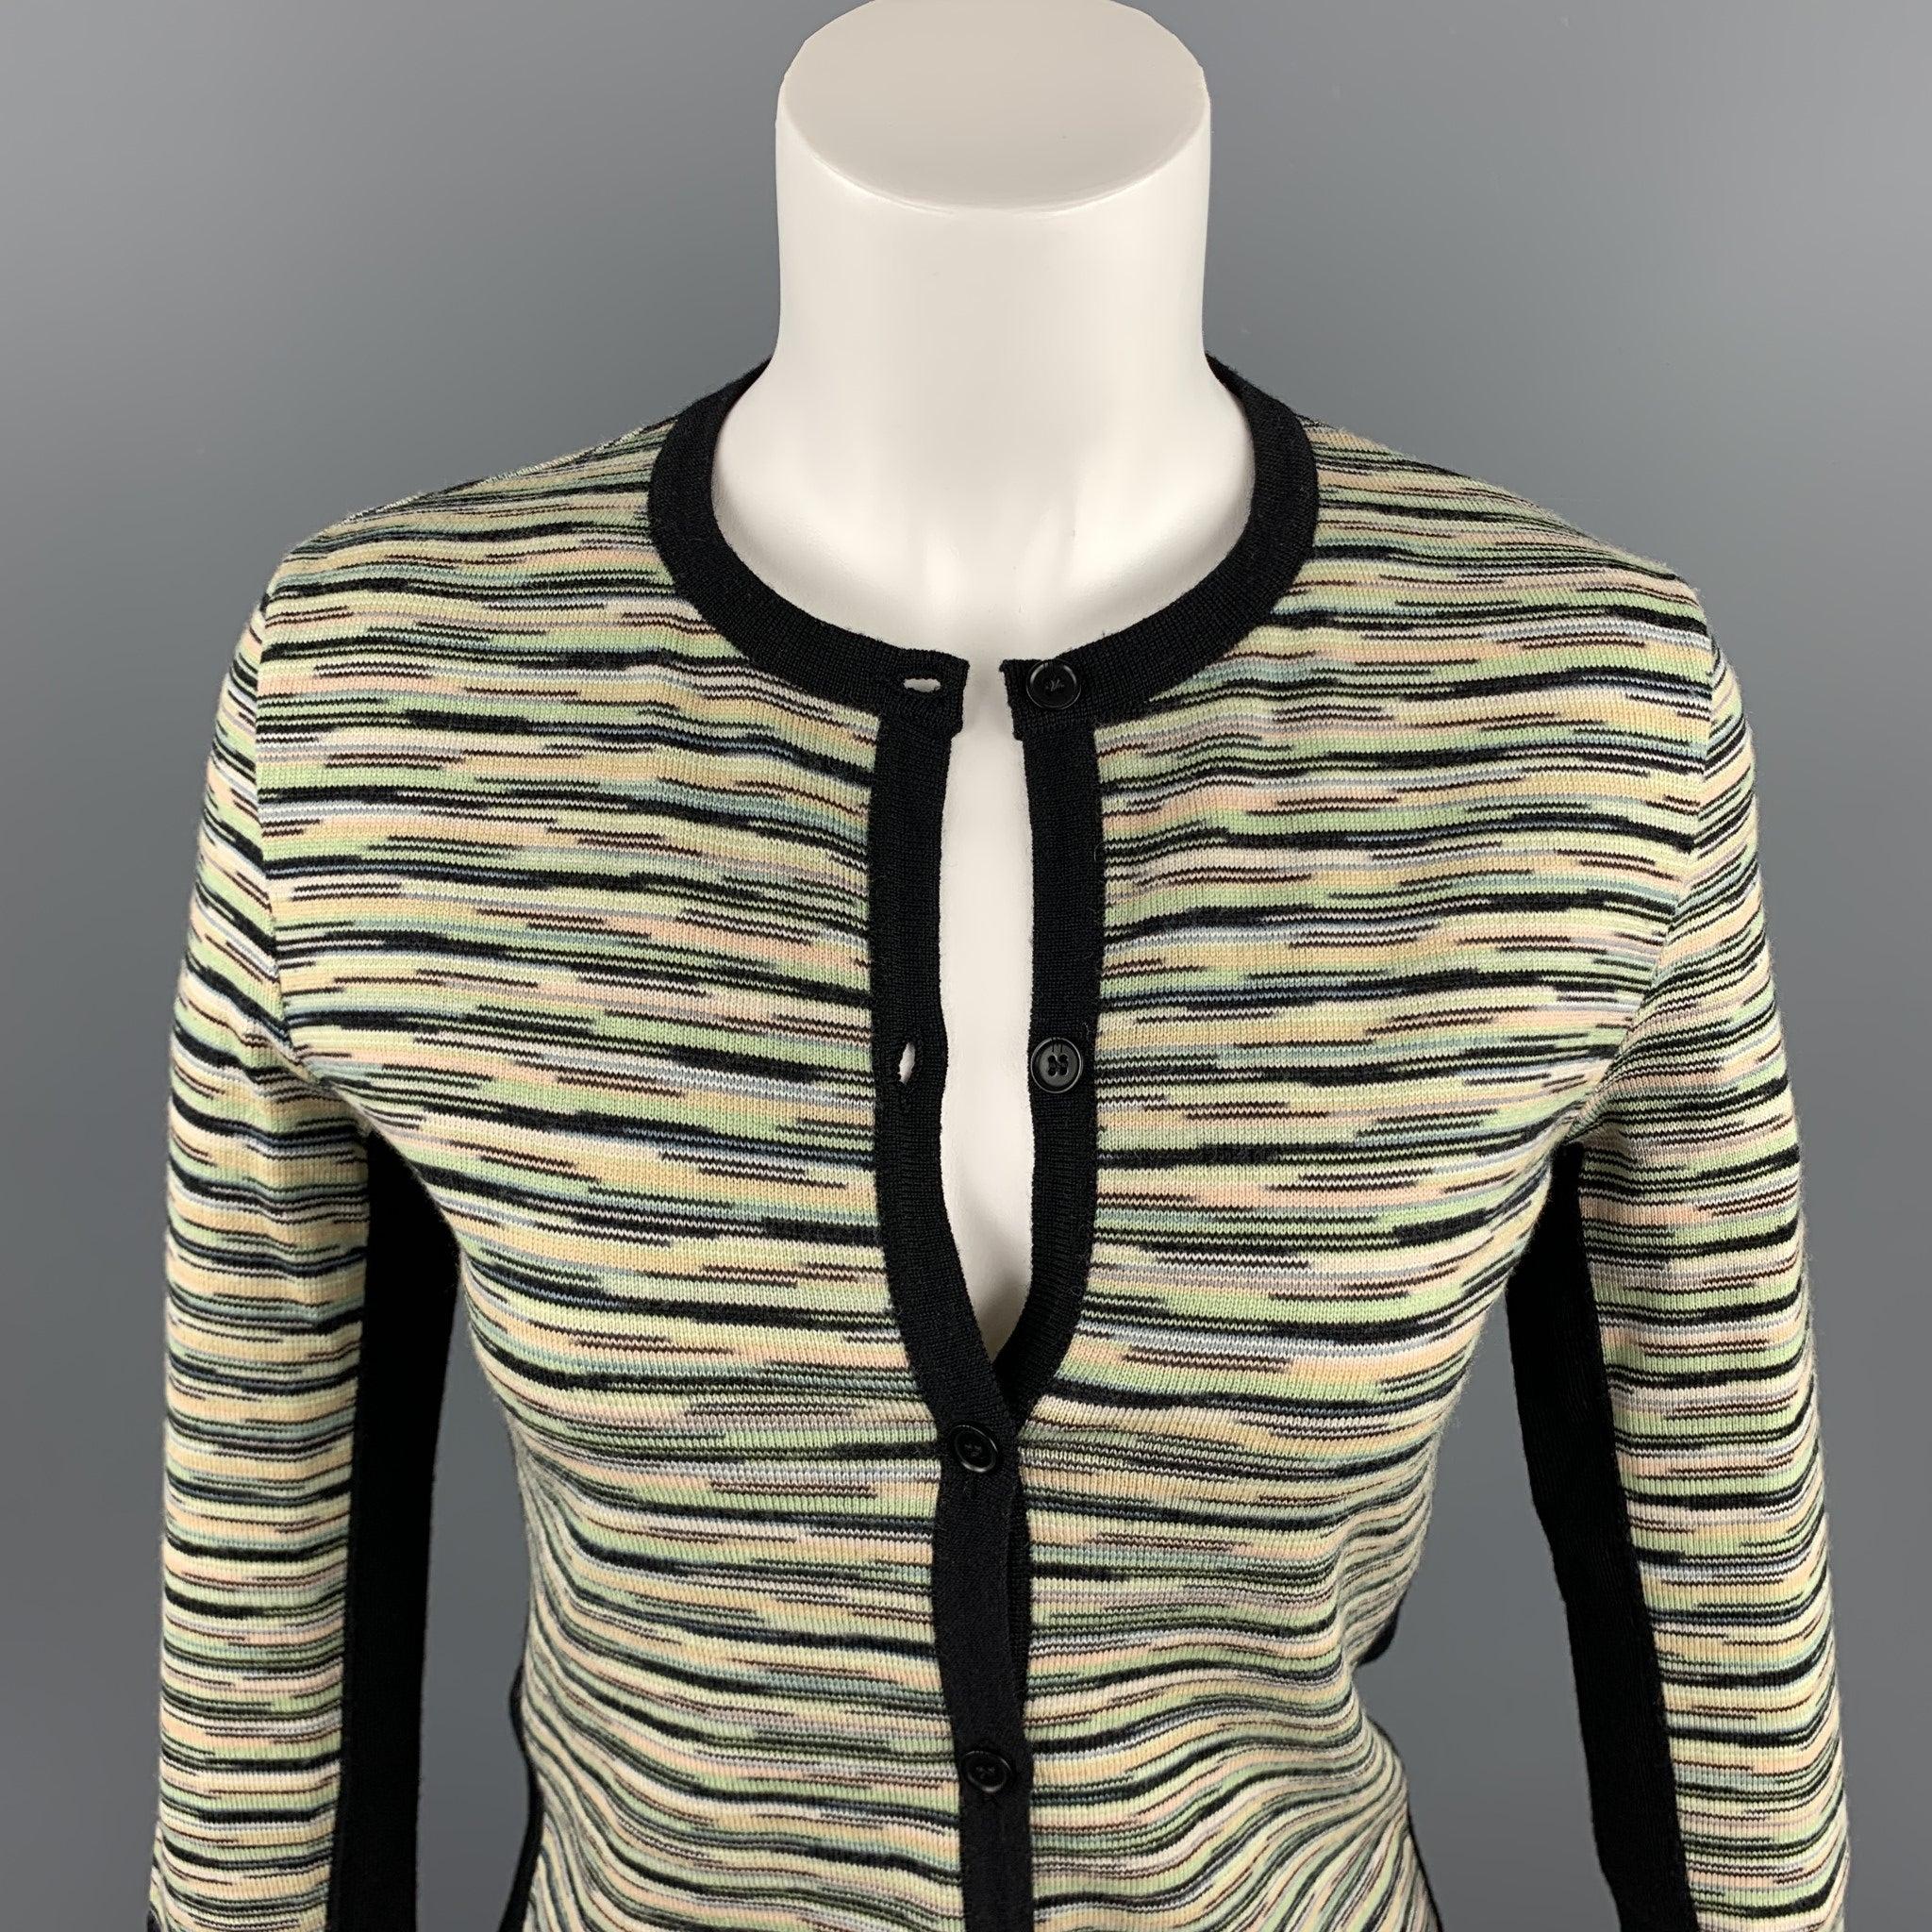 M MISSONI cardigan comes in a green knitted wool / acrylic with a black trim featuring a buttoned closure. Made in Italy. Matching top available.Excellent
Pre-Owned Condition. 

Marked:   US 8 

Measurements: 
 
Shoulder: 14 inches 
Bust: 34 inches